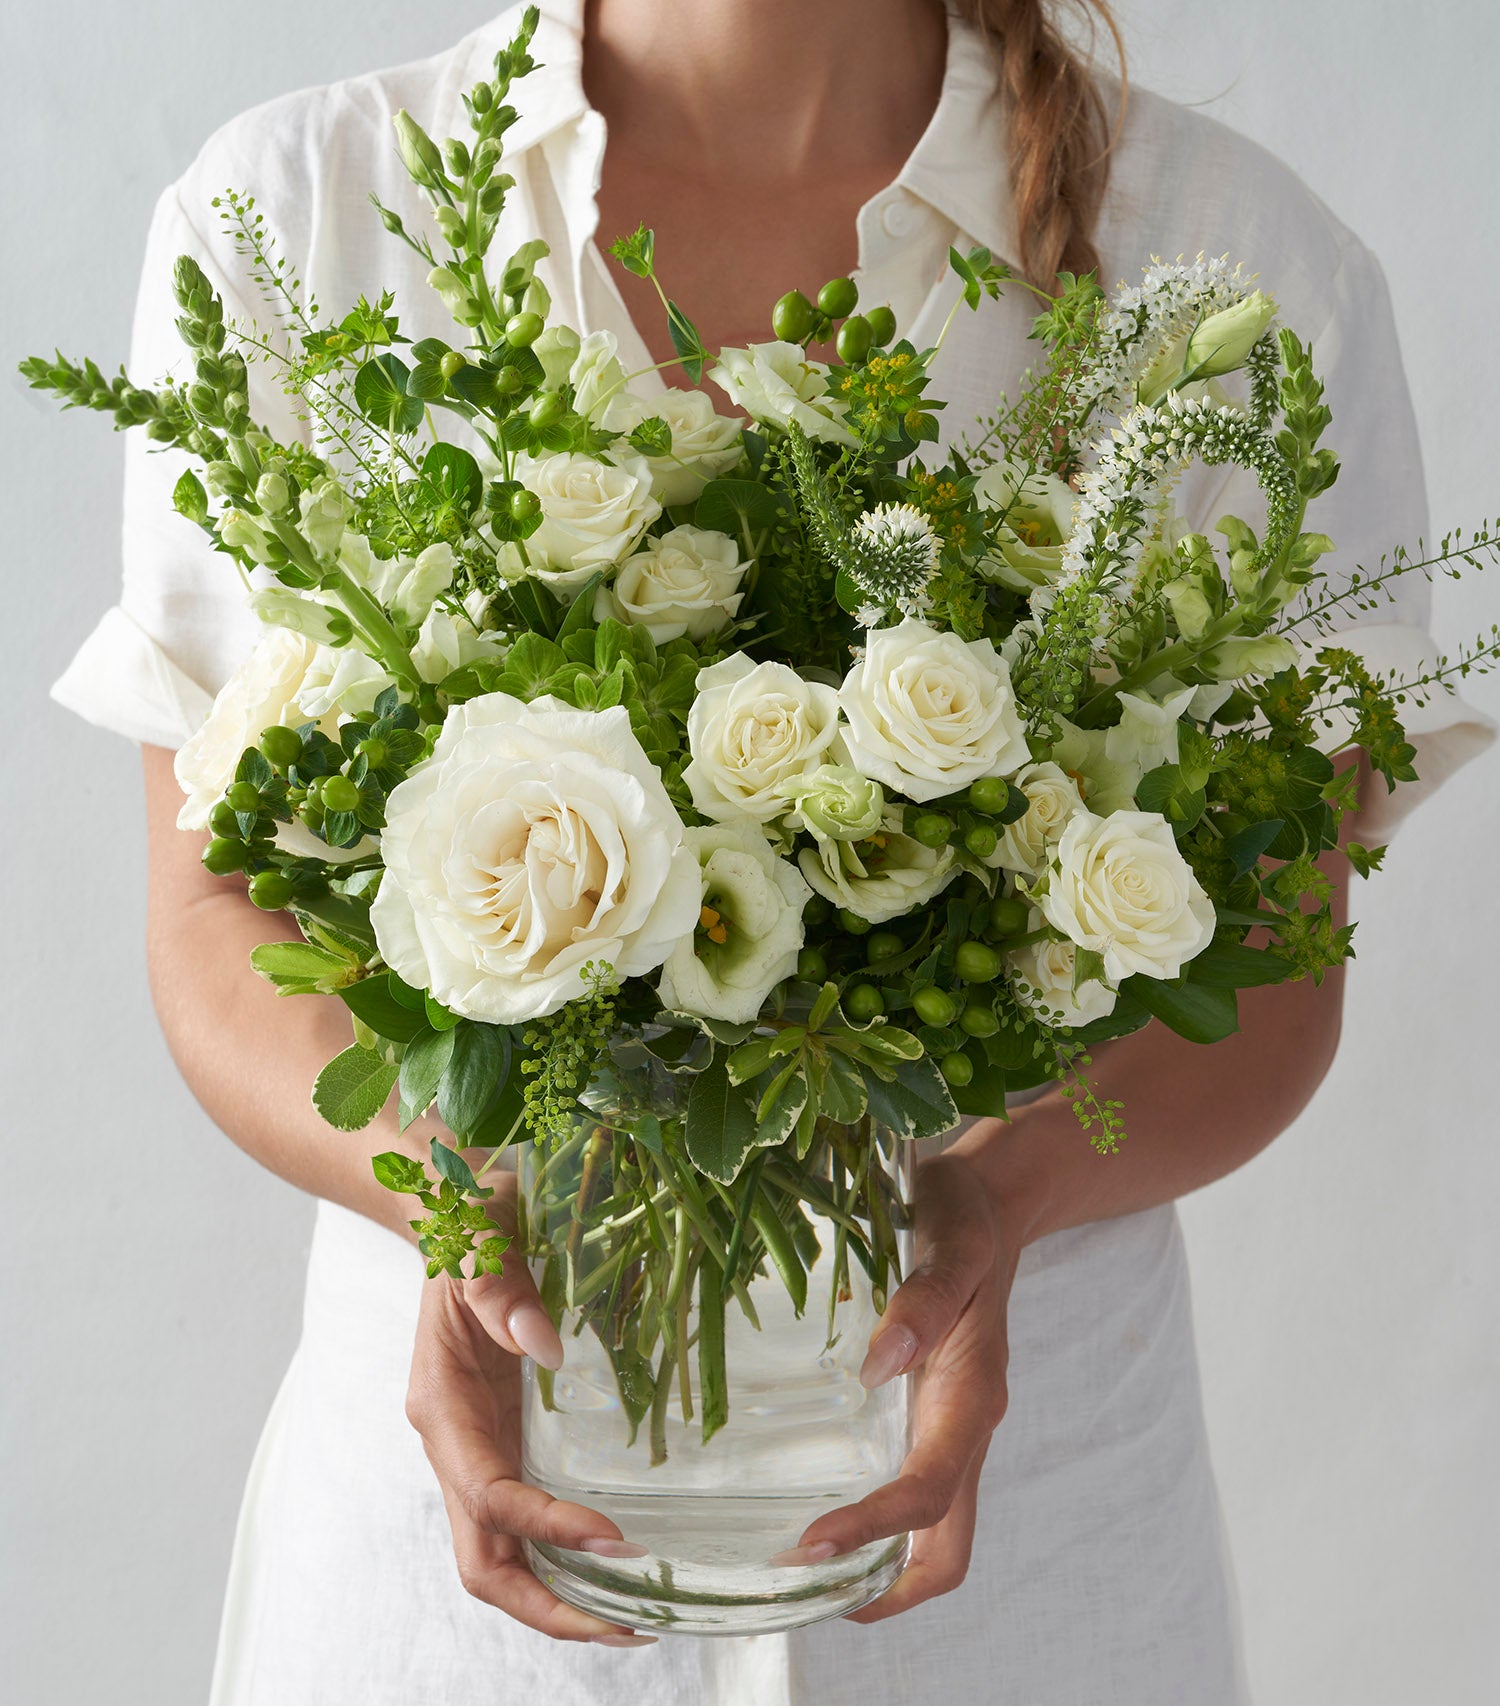 Woman wearing all white, holding clear glass vase filled with all white and green flowers including white roses, snapdragons, and lisianthus. 